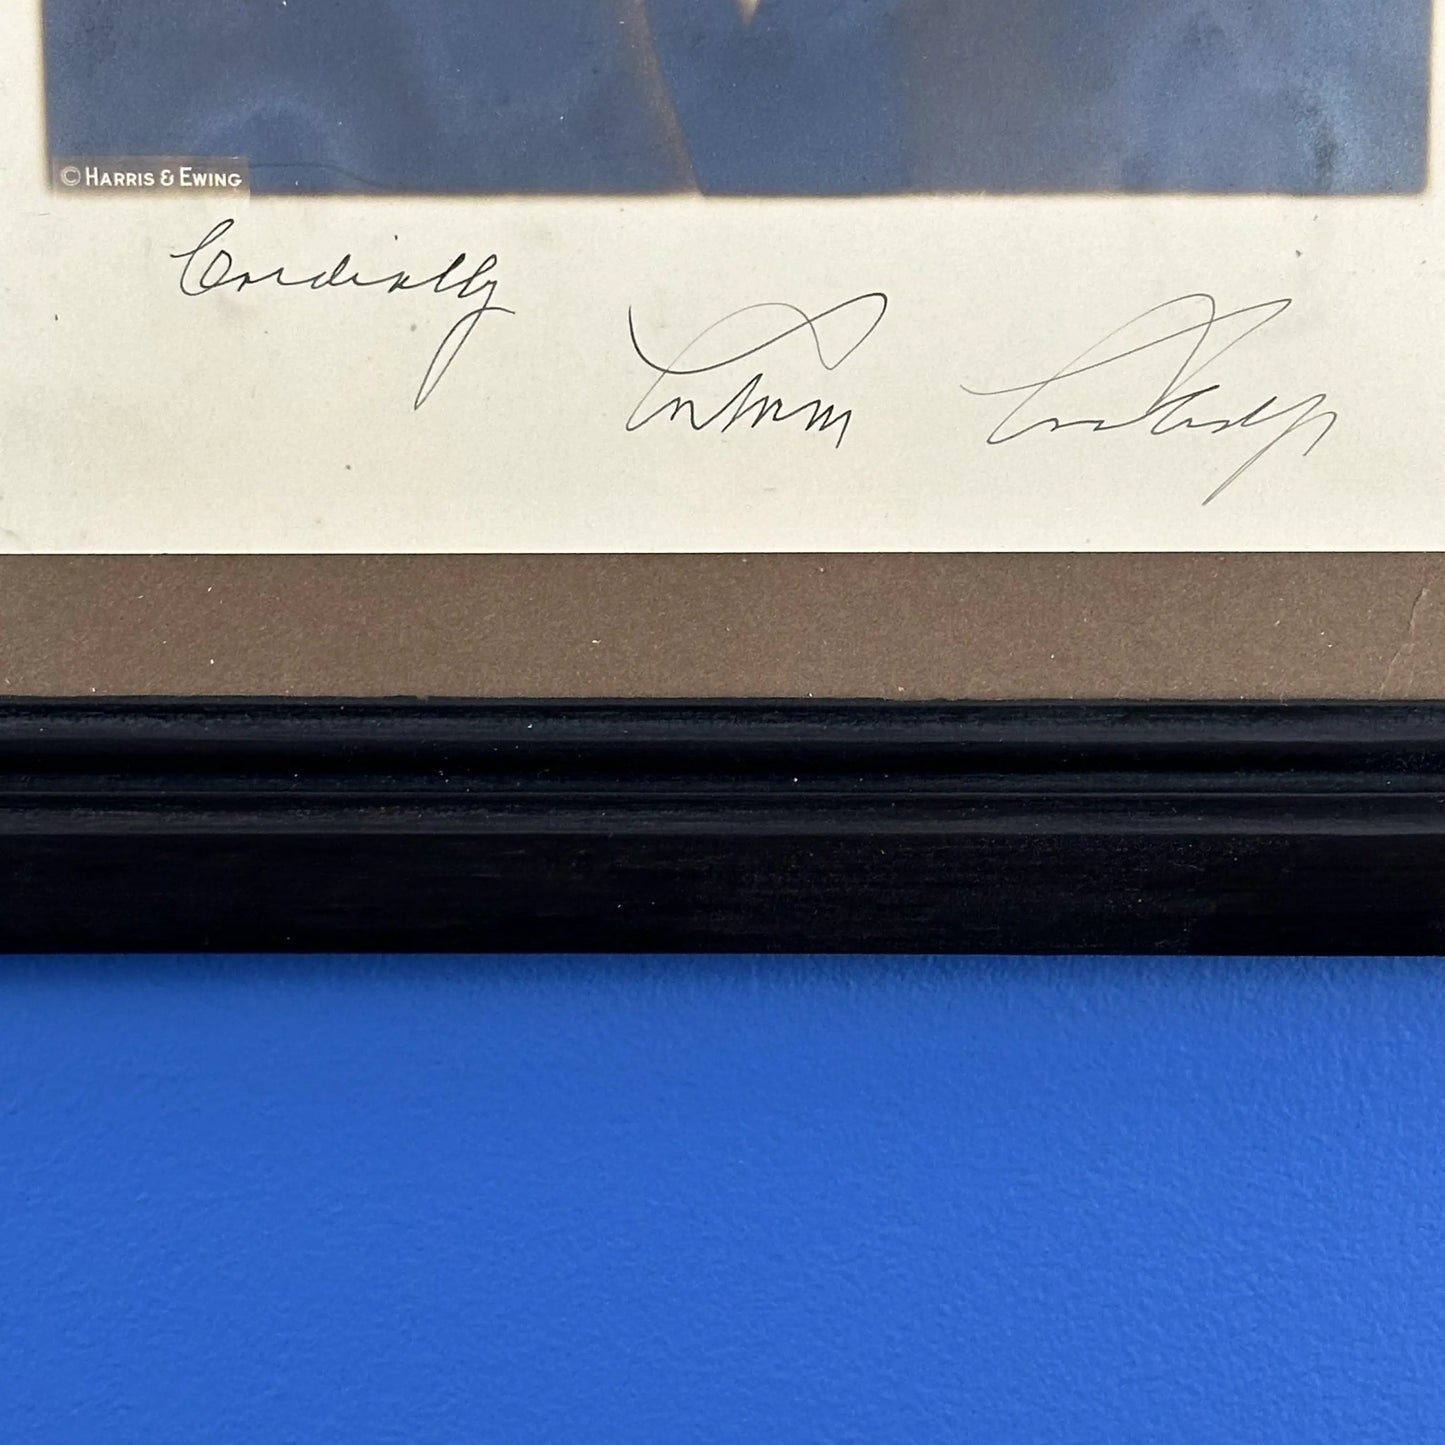 President Calvin Coolidge signed photograph with a note from his secretary, on White House stationery, in a handmade frame